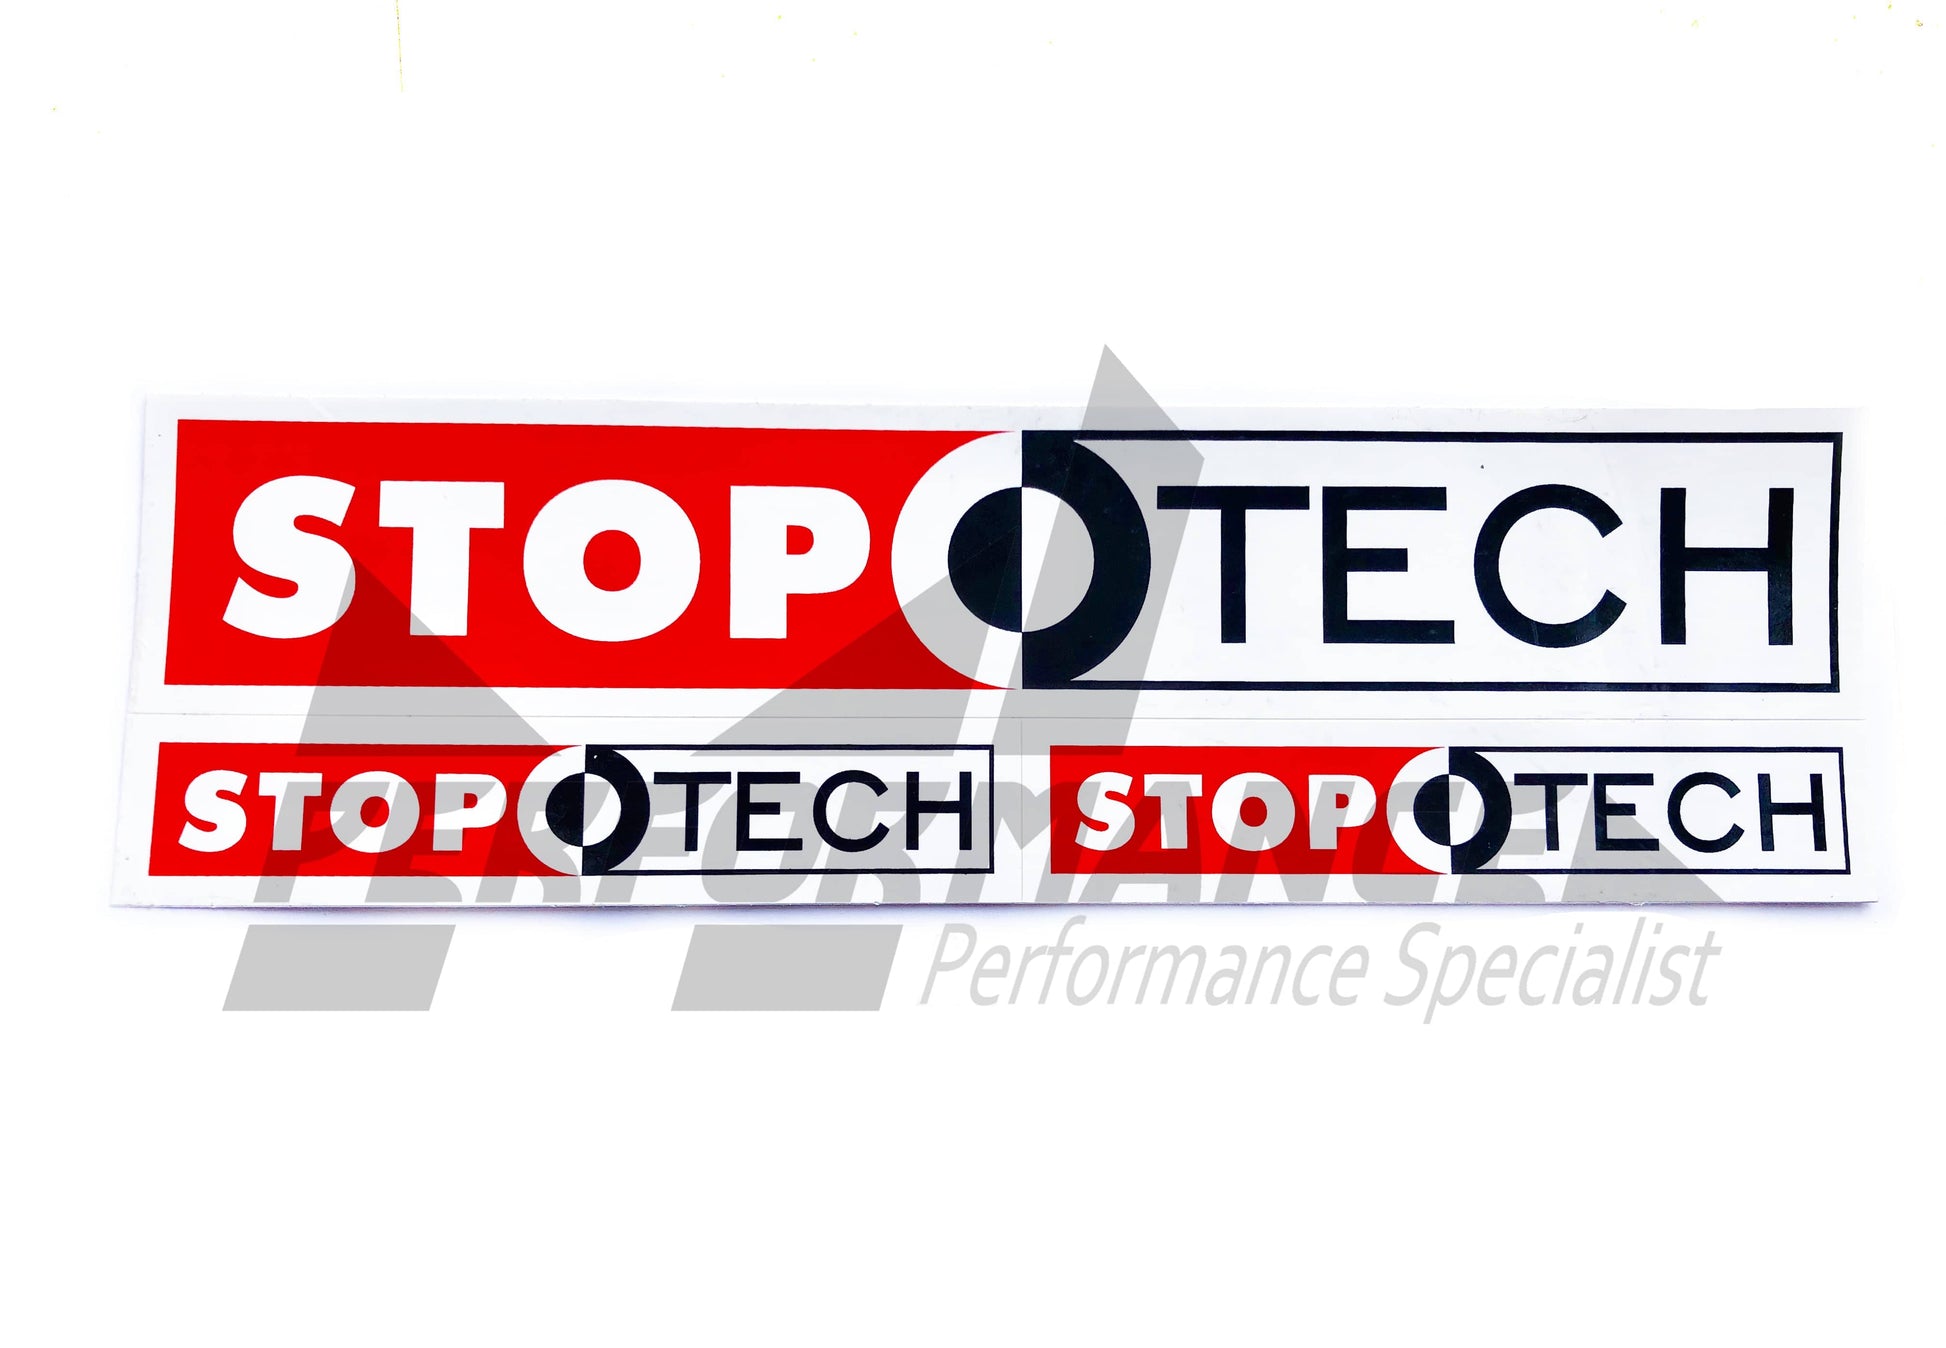 StopTech Set of 3 Stickers - ML Performance US